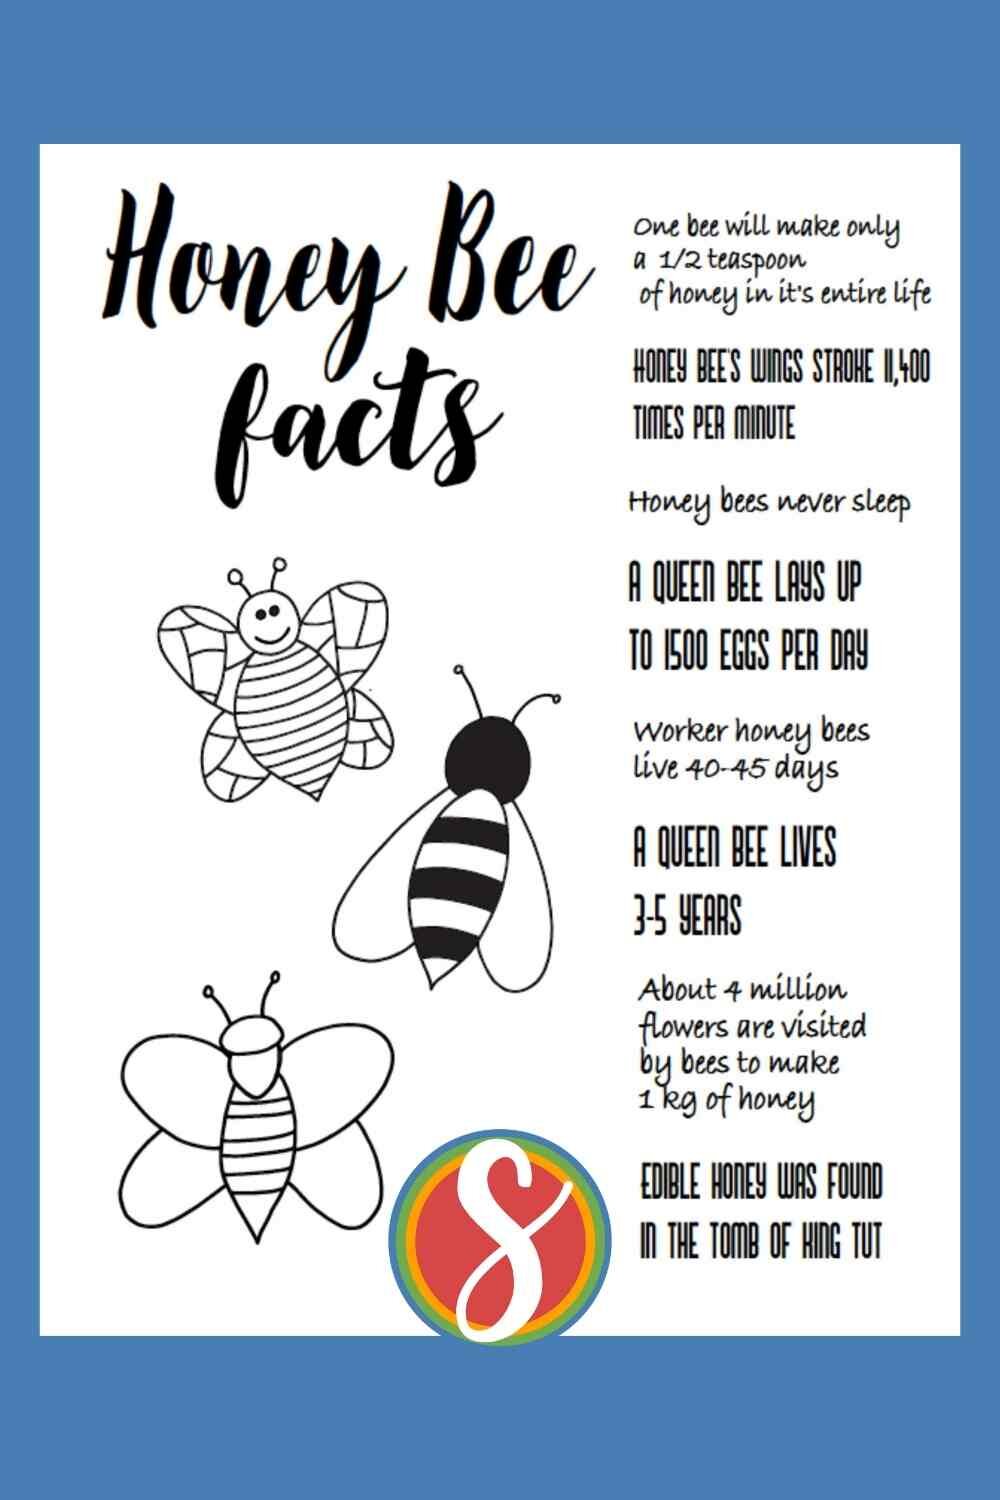 this image has three simple bees to color and the rest of the page has text with facts about honey bees